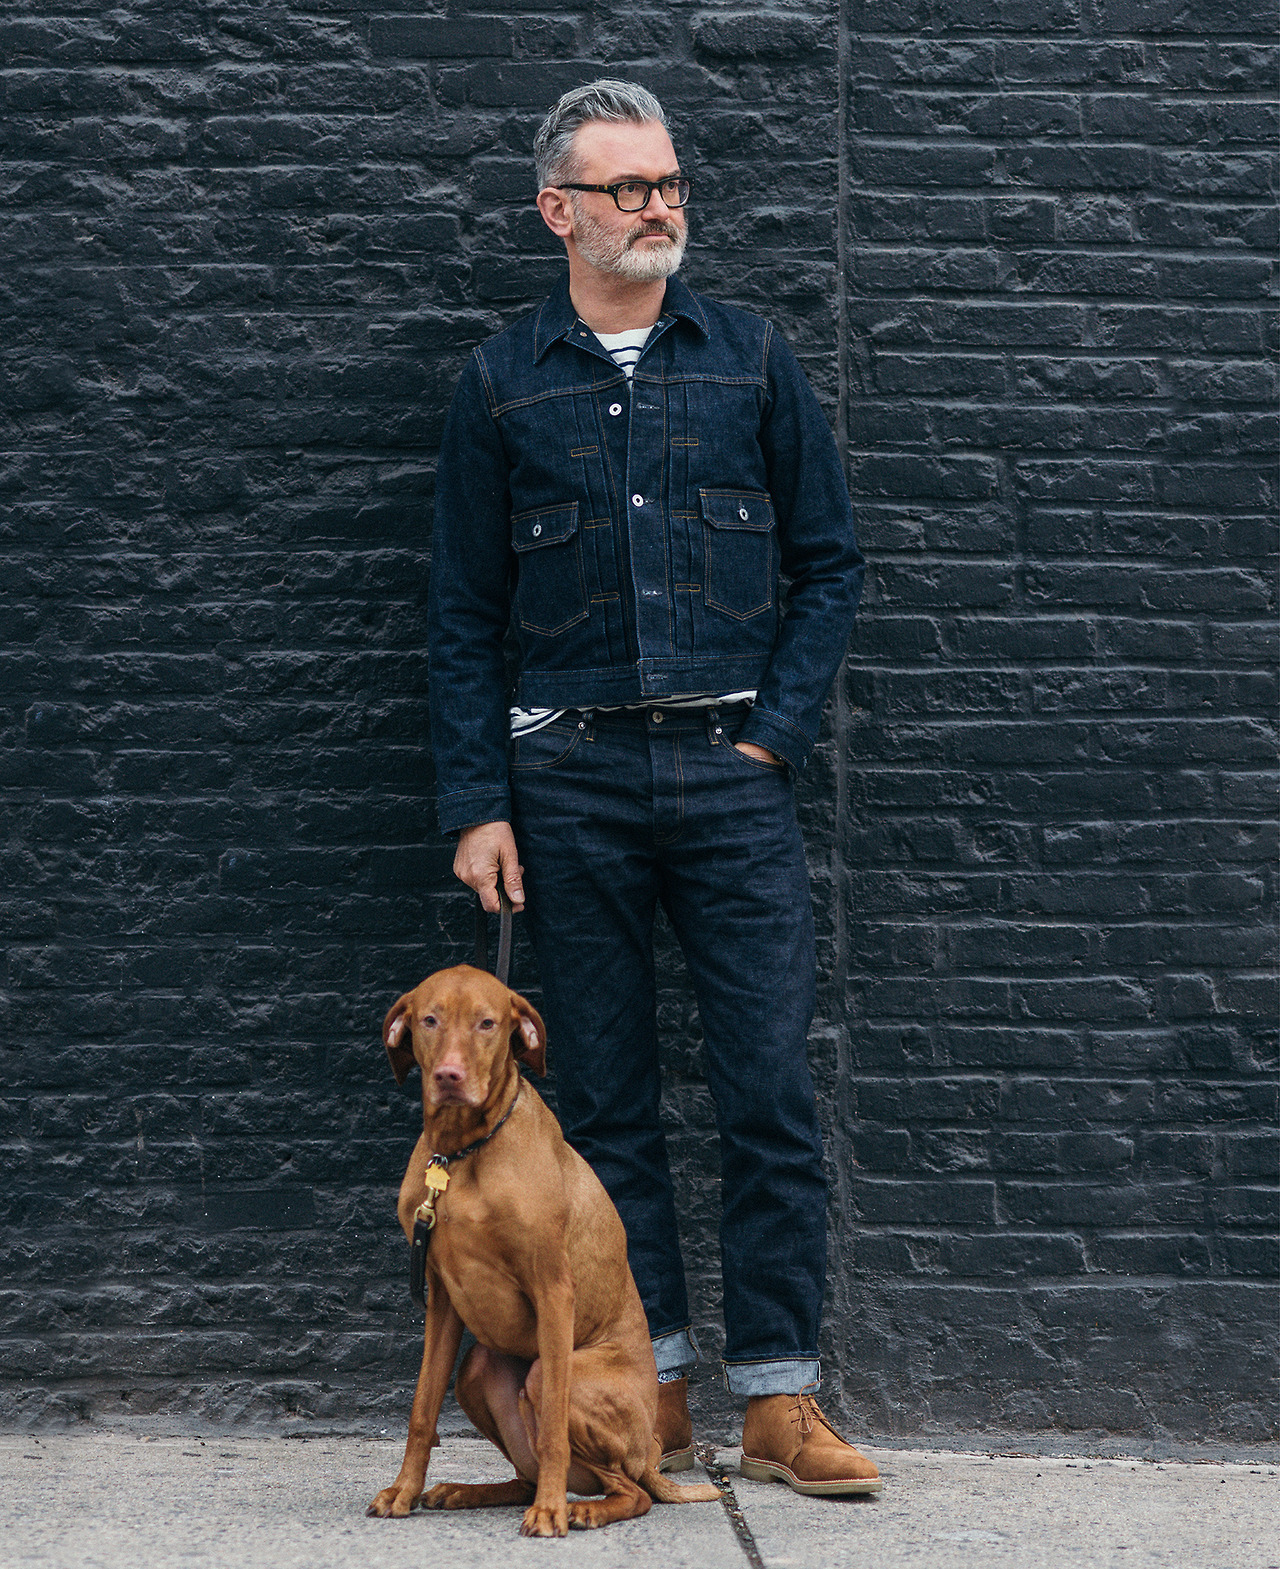 How to Look Great in Double Denim
To ensure your look delivers a double shot of cool, we asked our men’s designer Frank to demonstrate how it’s done. Read more here.